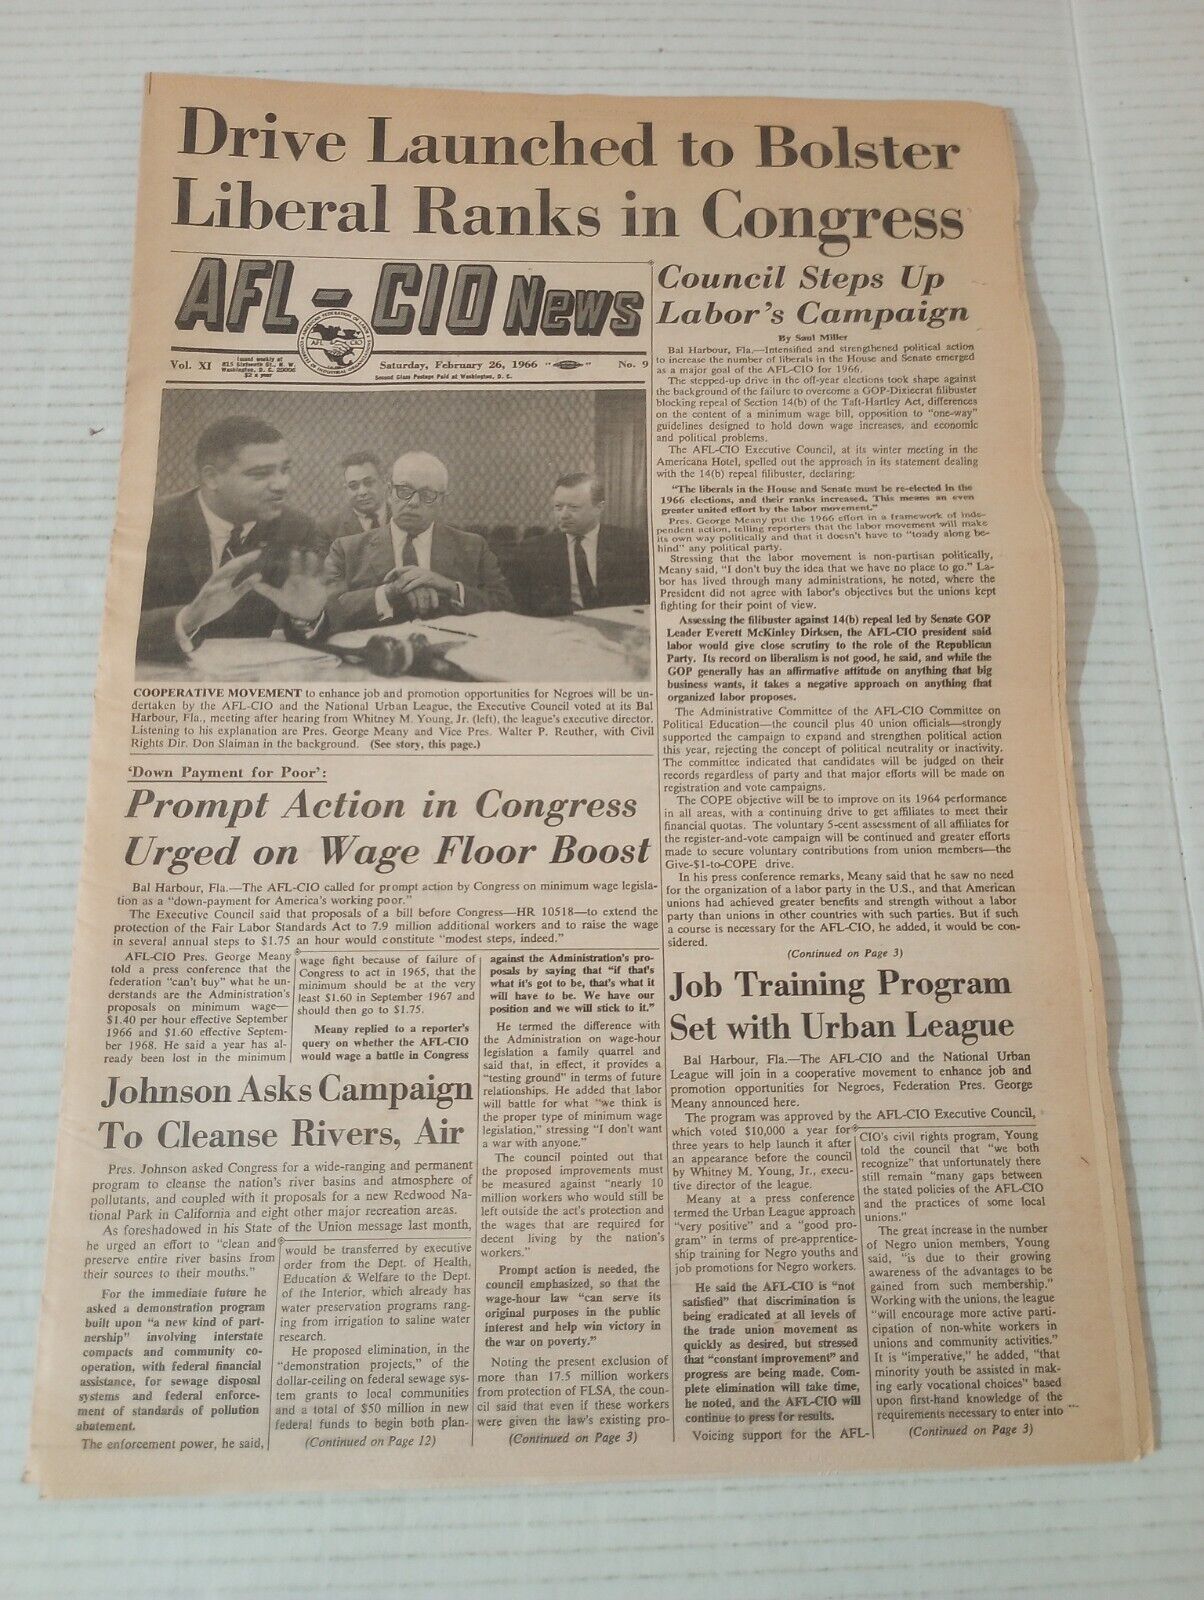 AFL-CIO Trade Union News Feb 26 1966 Johnson Asks Campaign To Cleanse Rivers Air